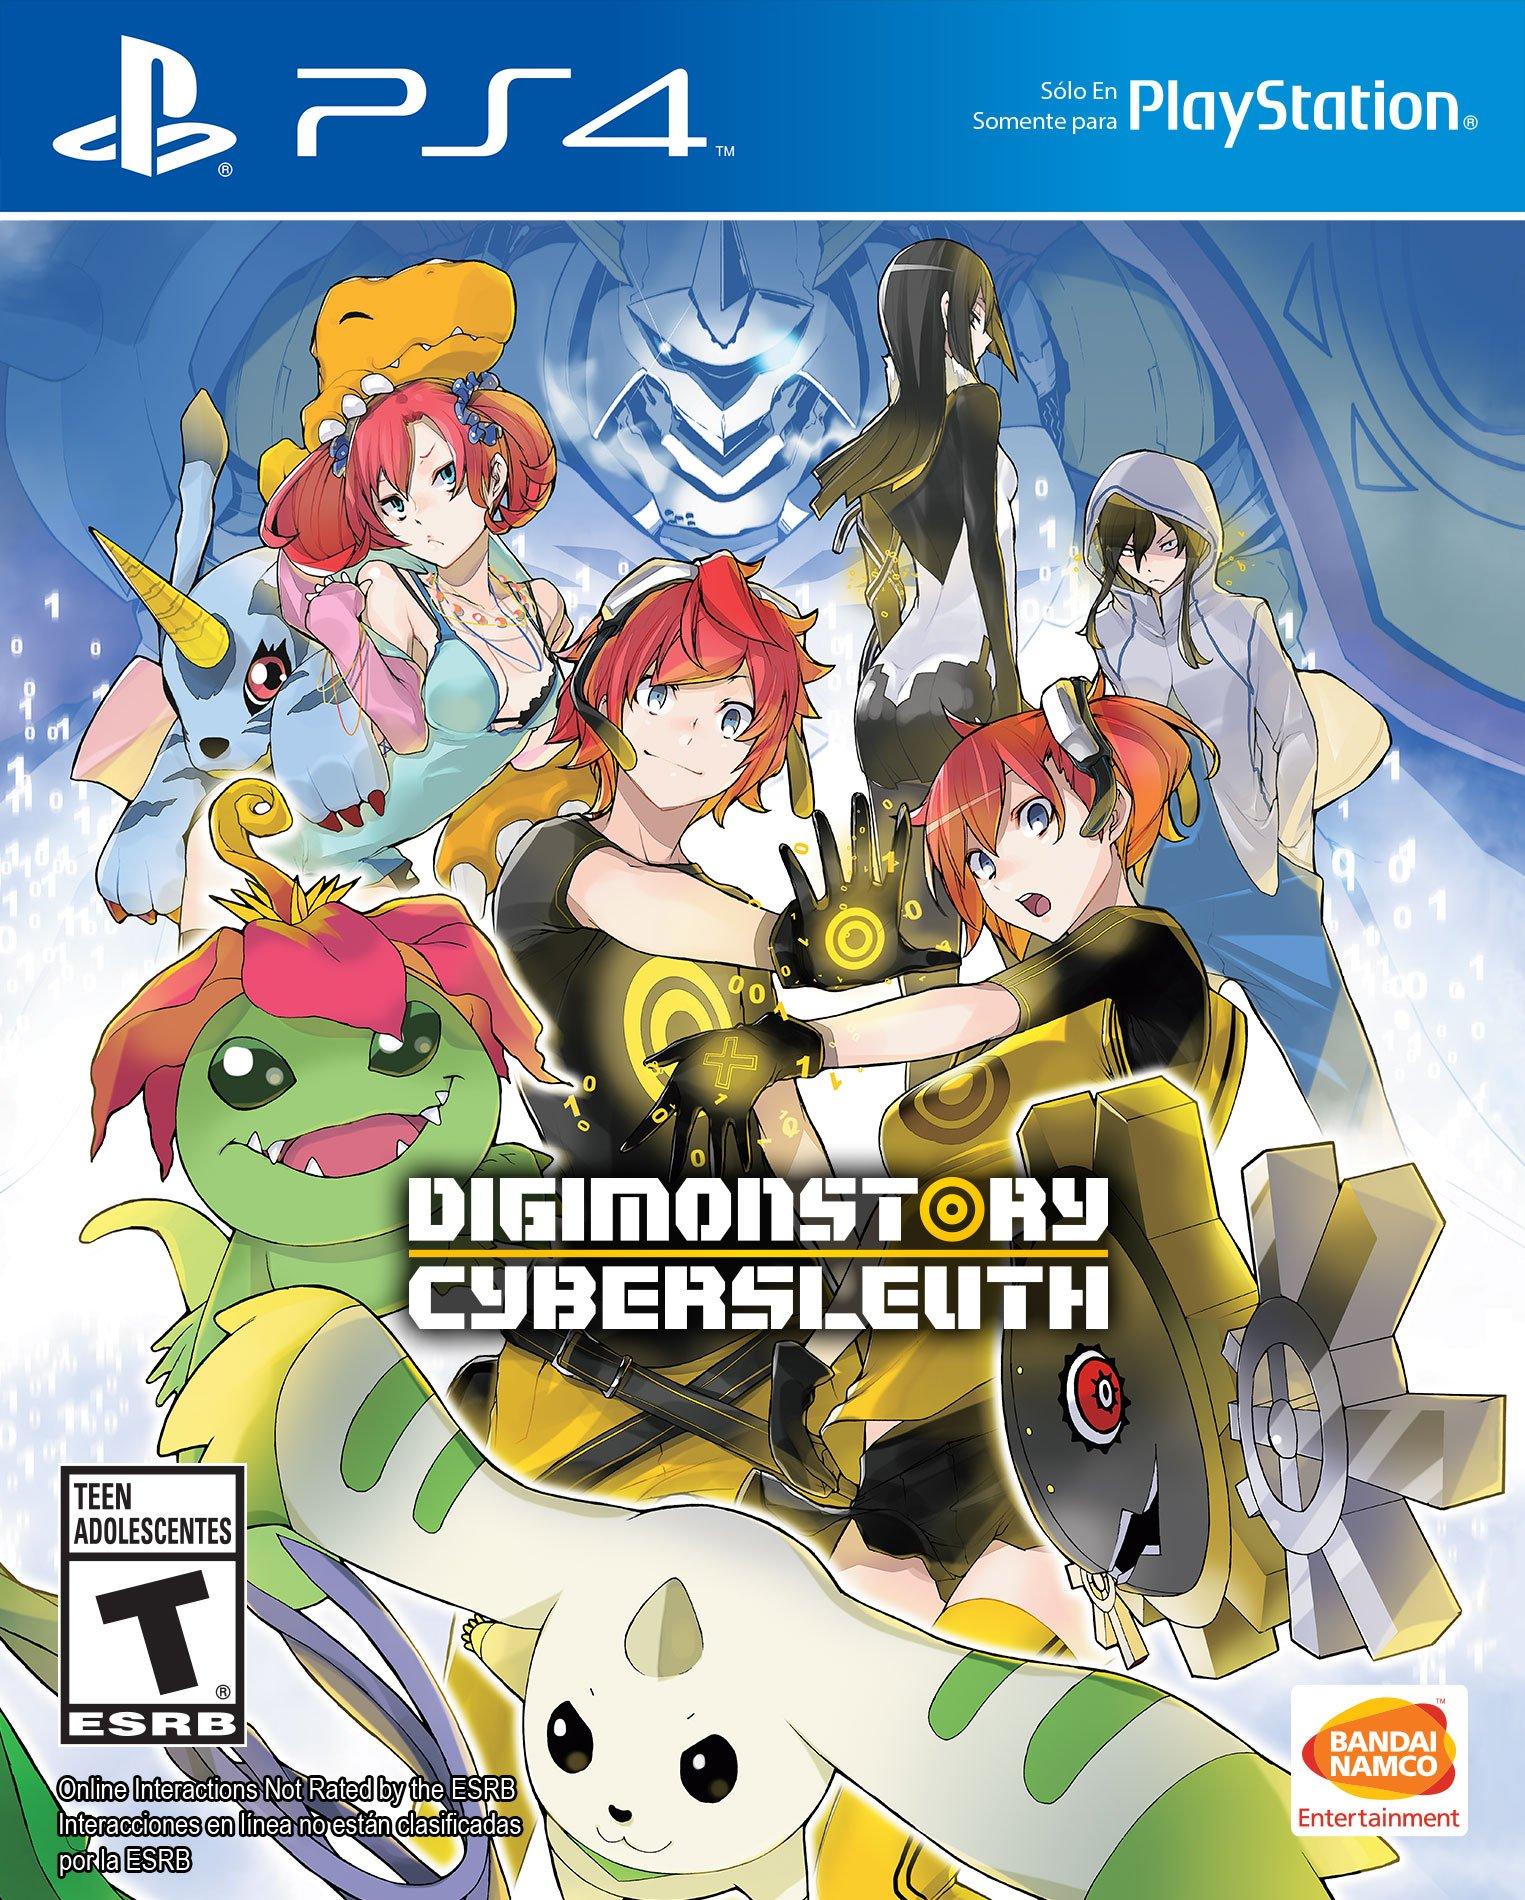 digimon games for xbox 360